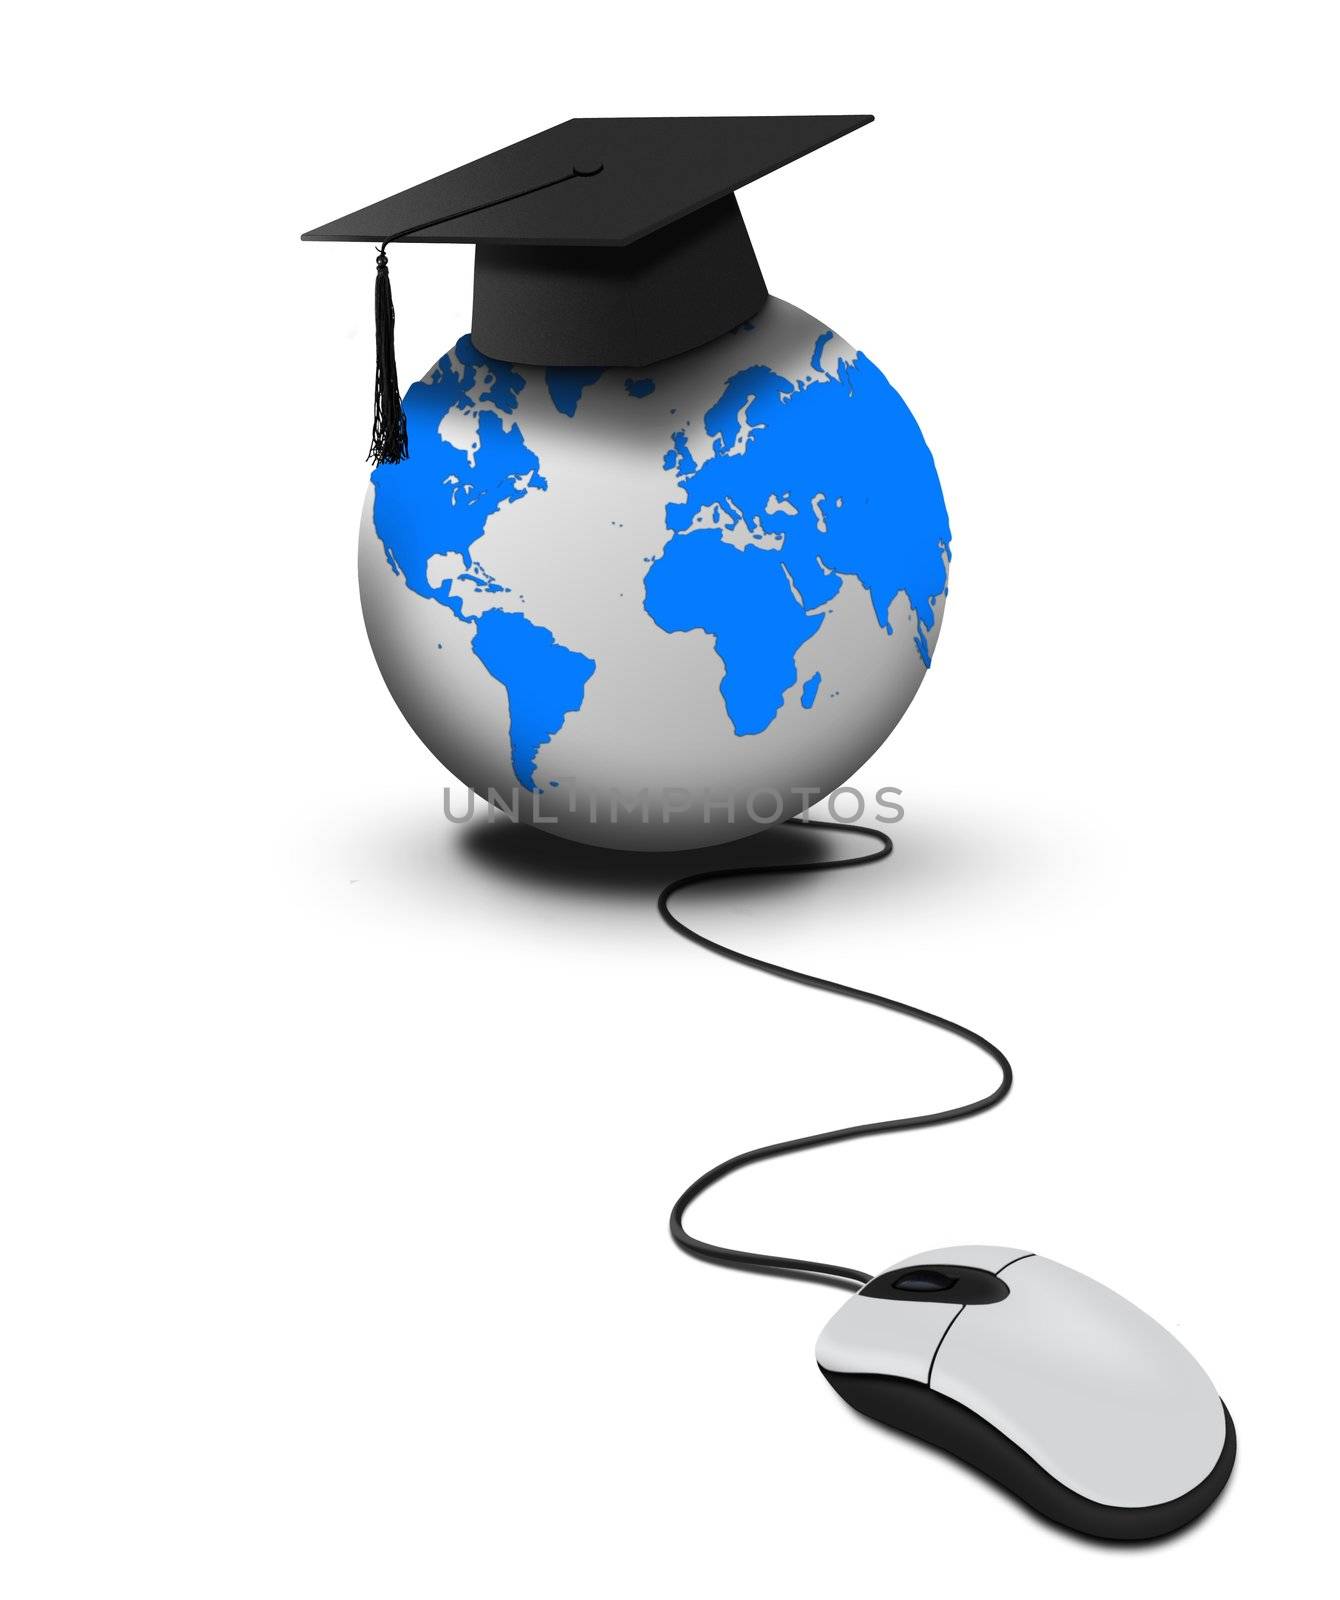 Online world wide education with mouse click